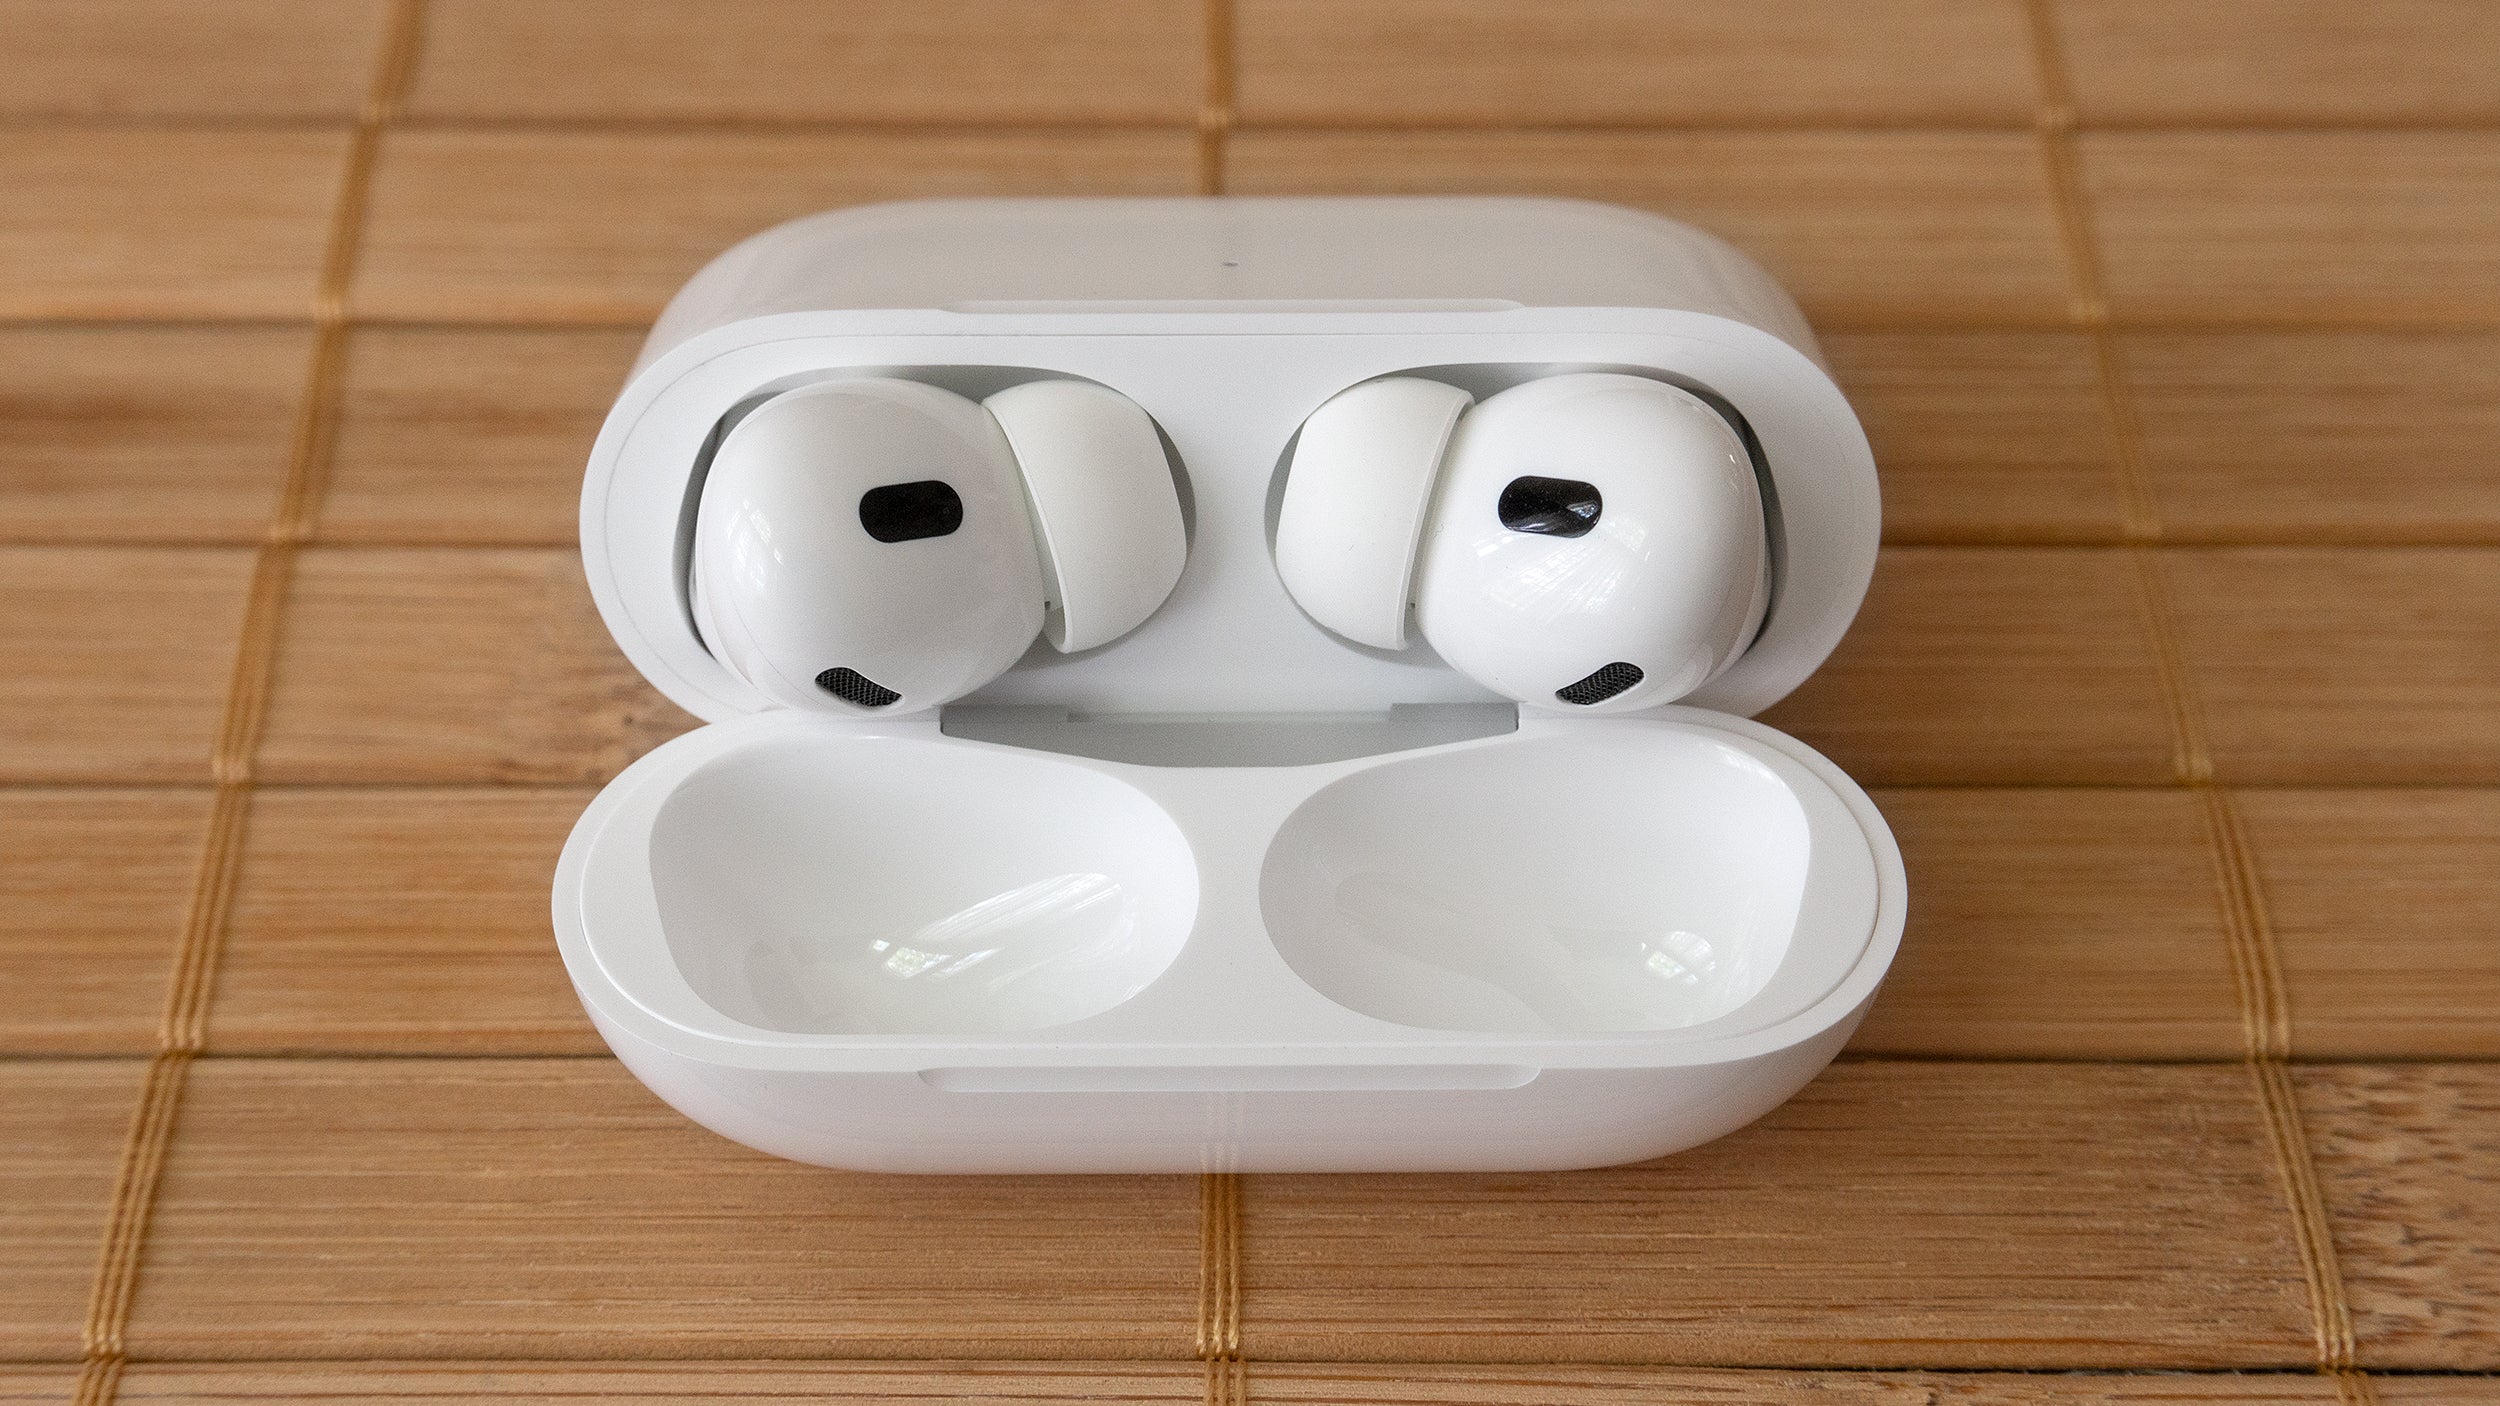  Apple AirPods Pro (2nd Generation)